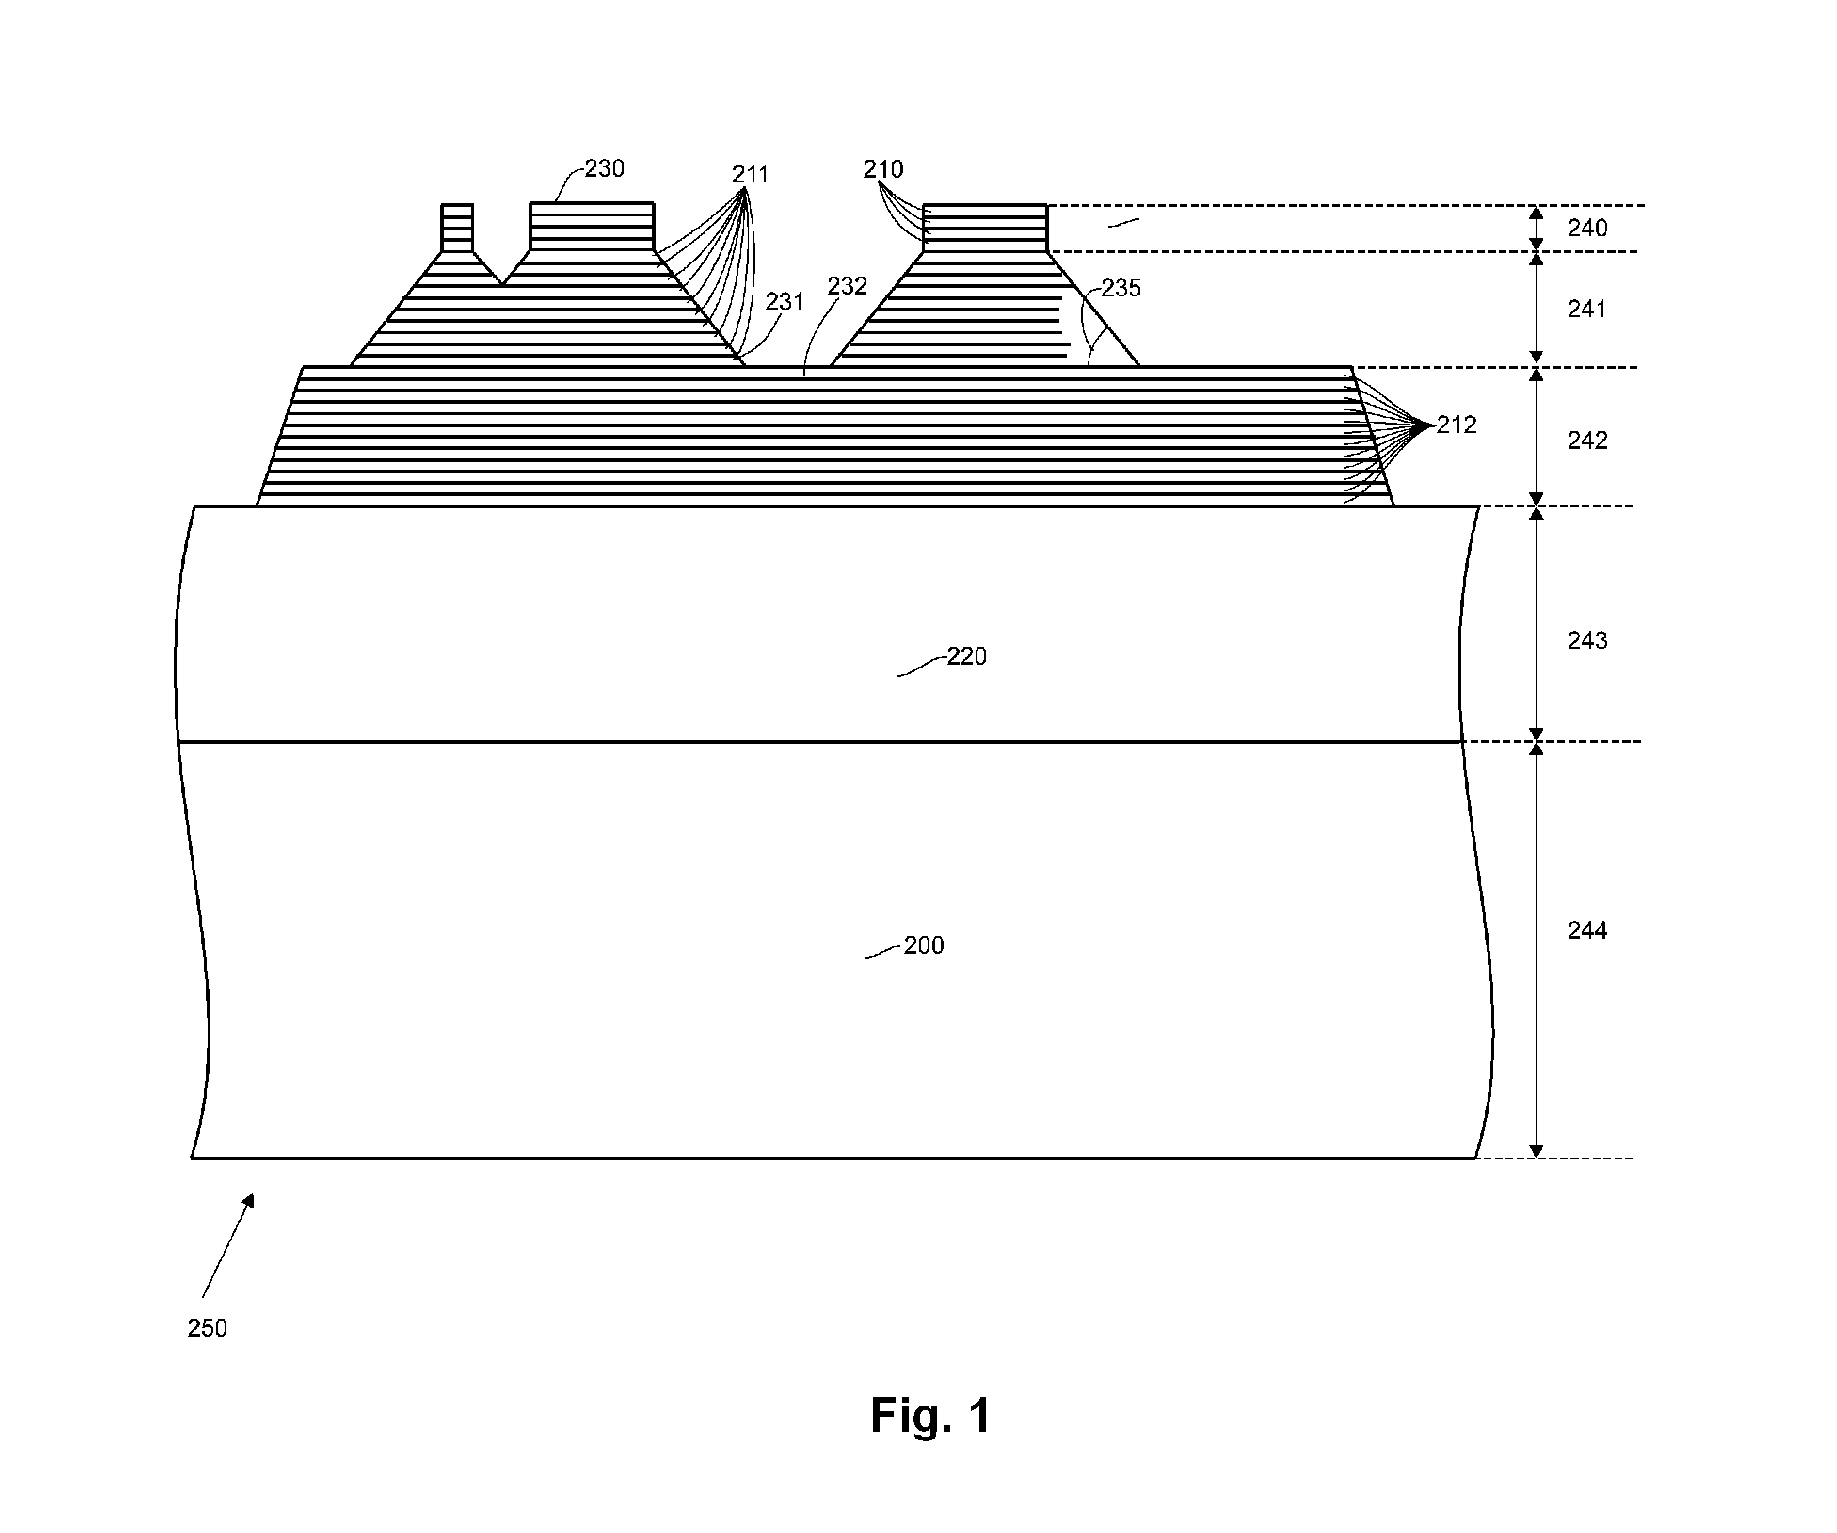 Imaging apparatus and method for making flexographic printing masters